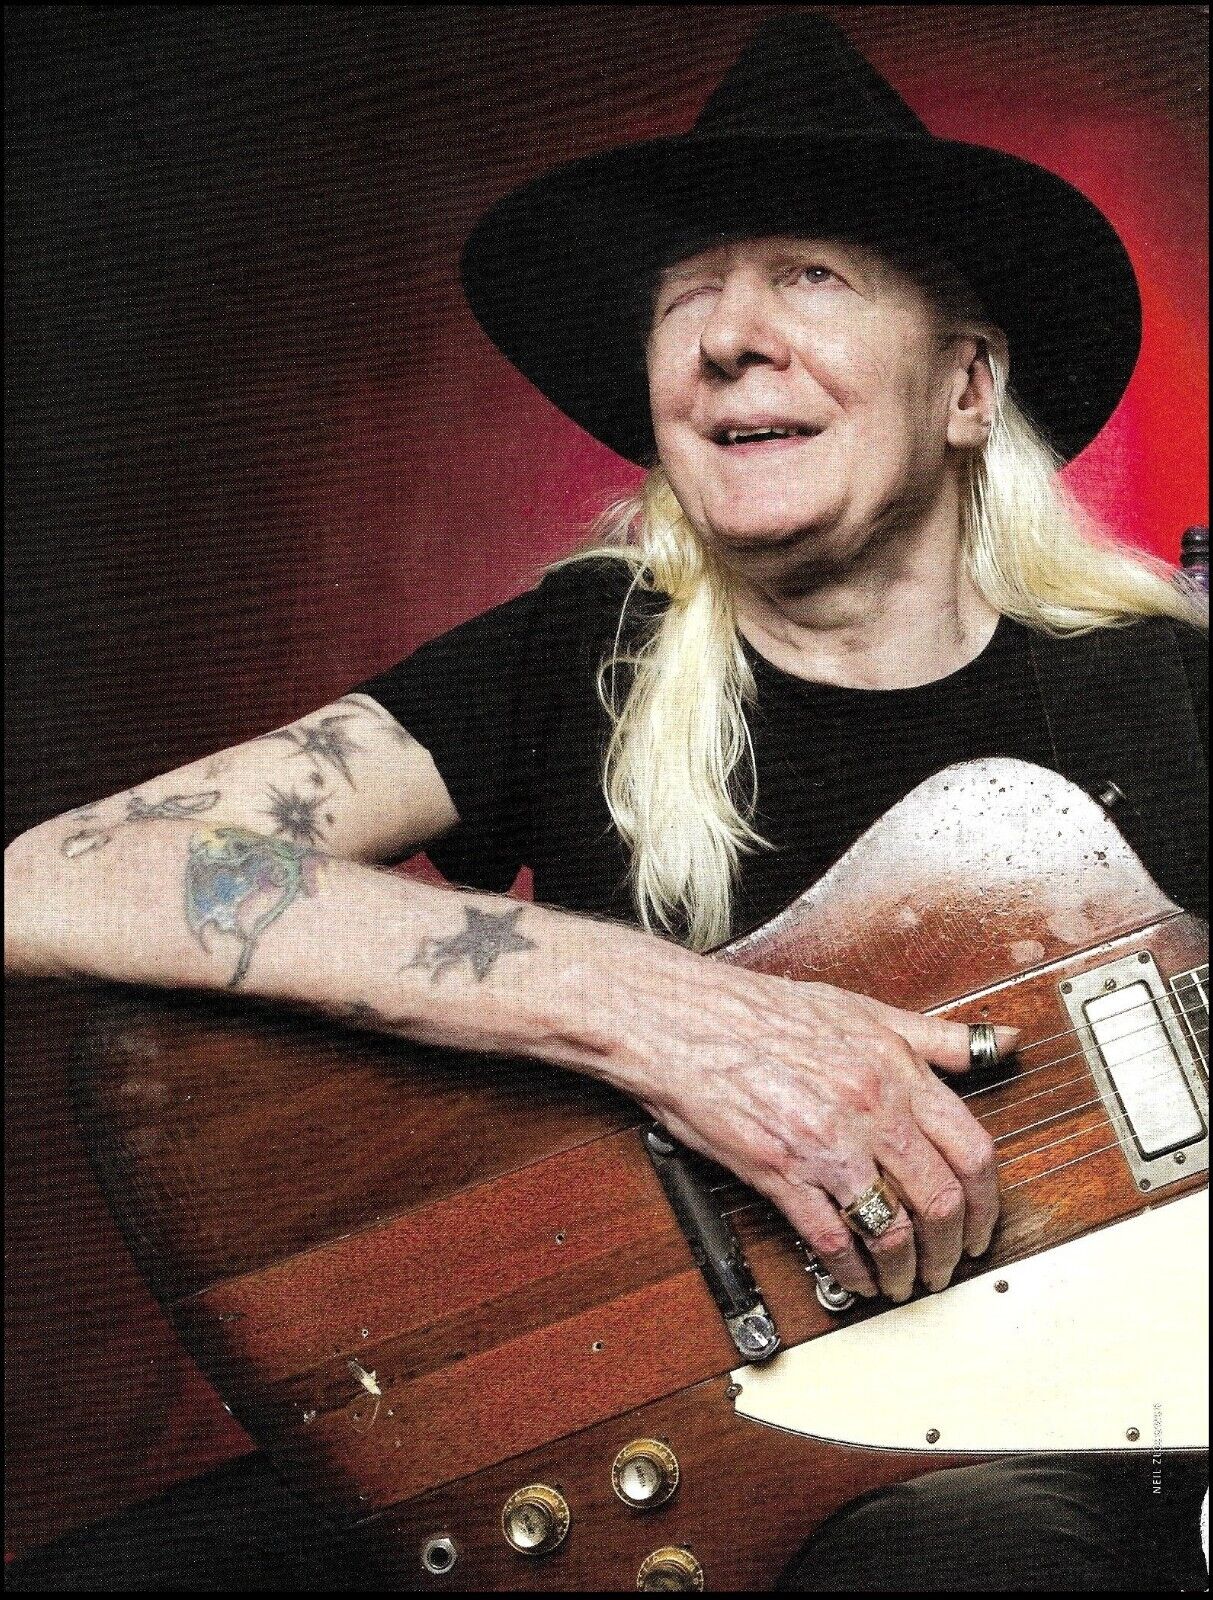 Johnny Winter with his 1963 Gibson Firebird V guitar 8 x 11 pin-up photo print